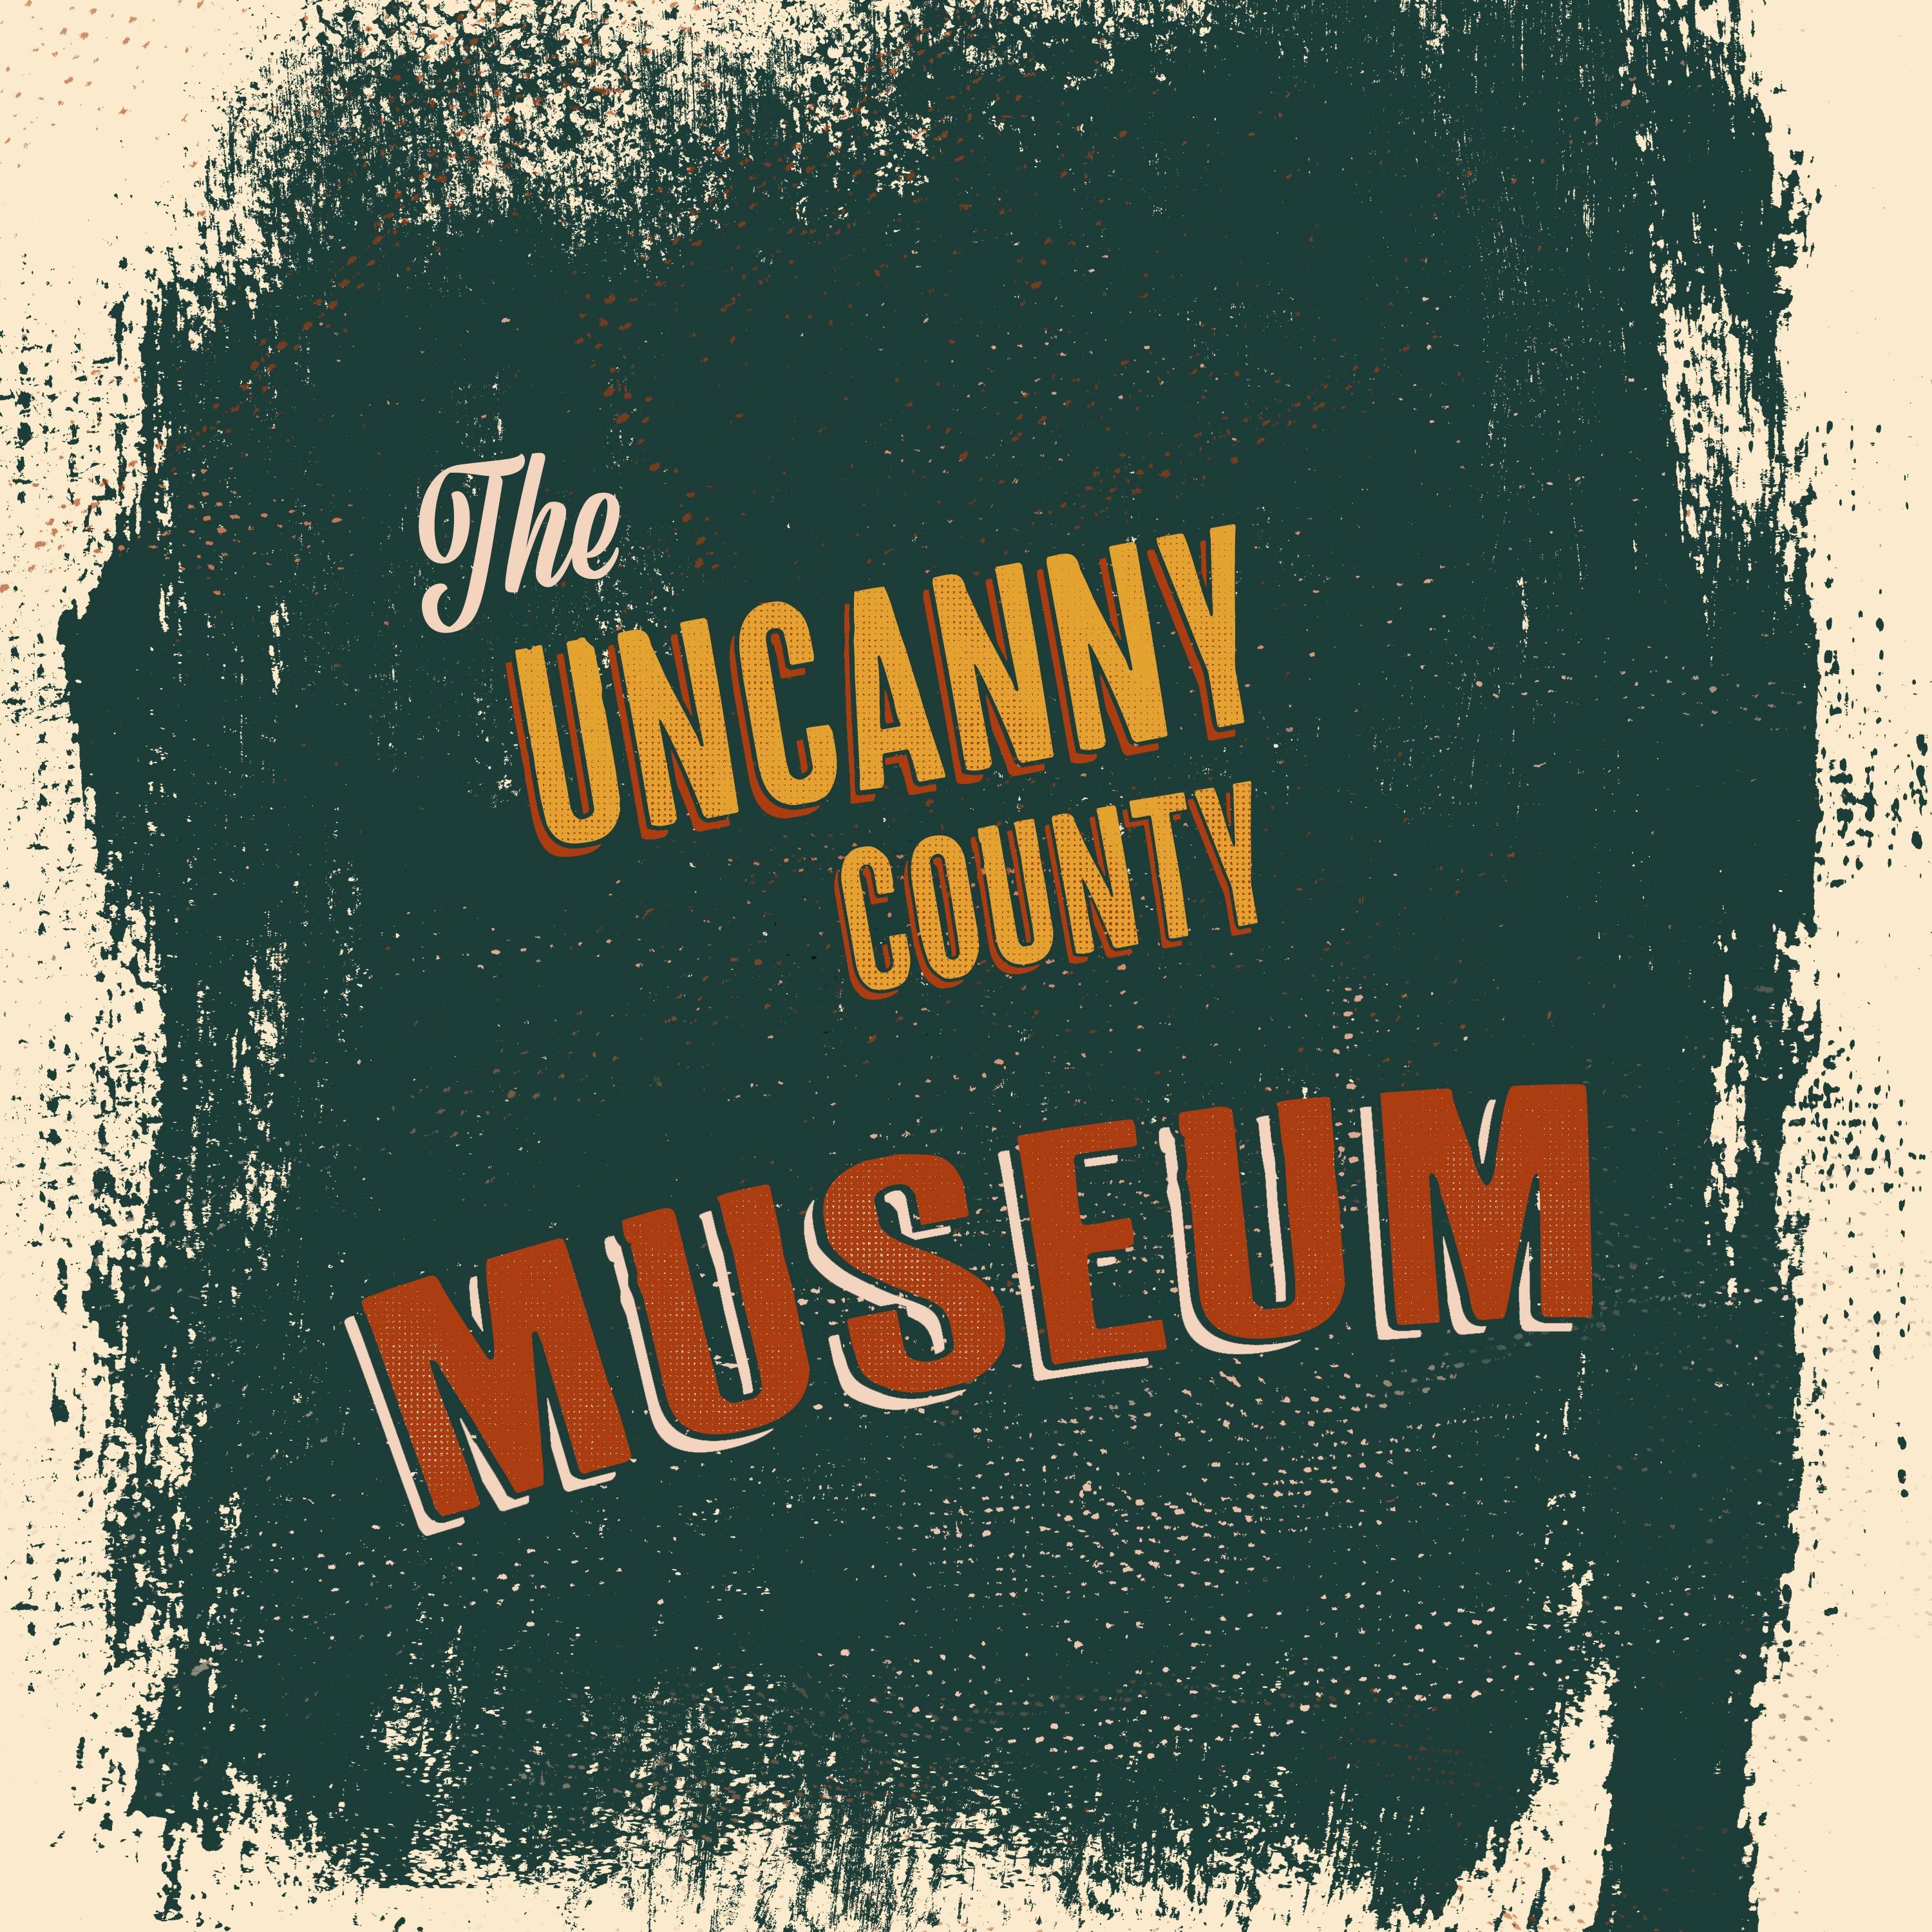 The Uncanny County Museum